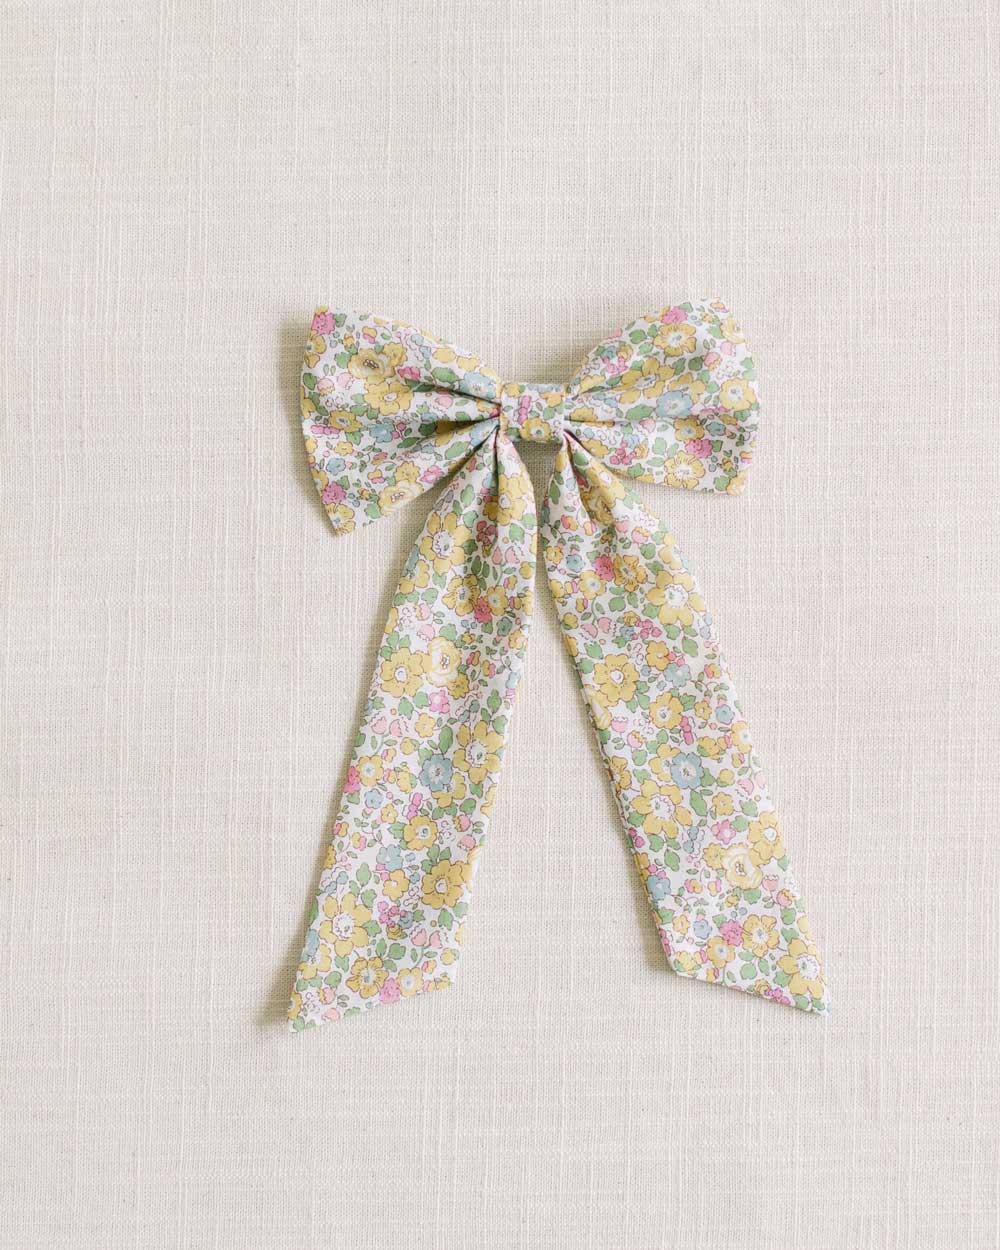 THE YELLOW FLORAL CHILDREN'S BOW MADE WITH LIBERTY FABRIC